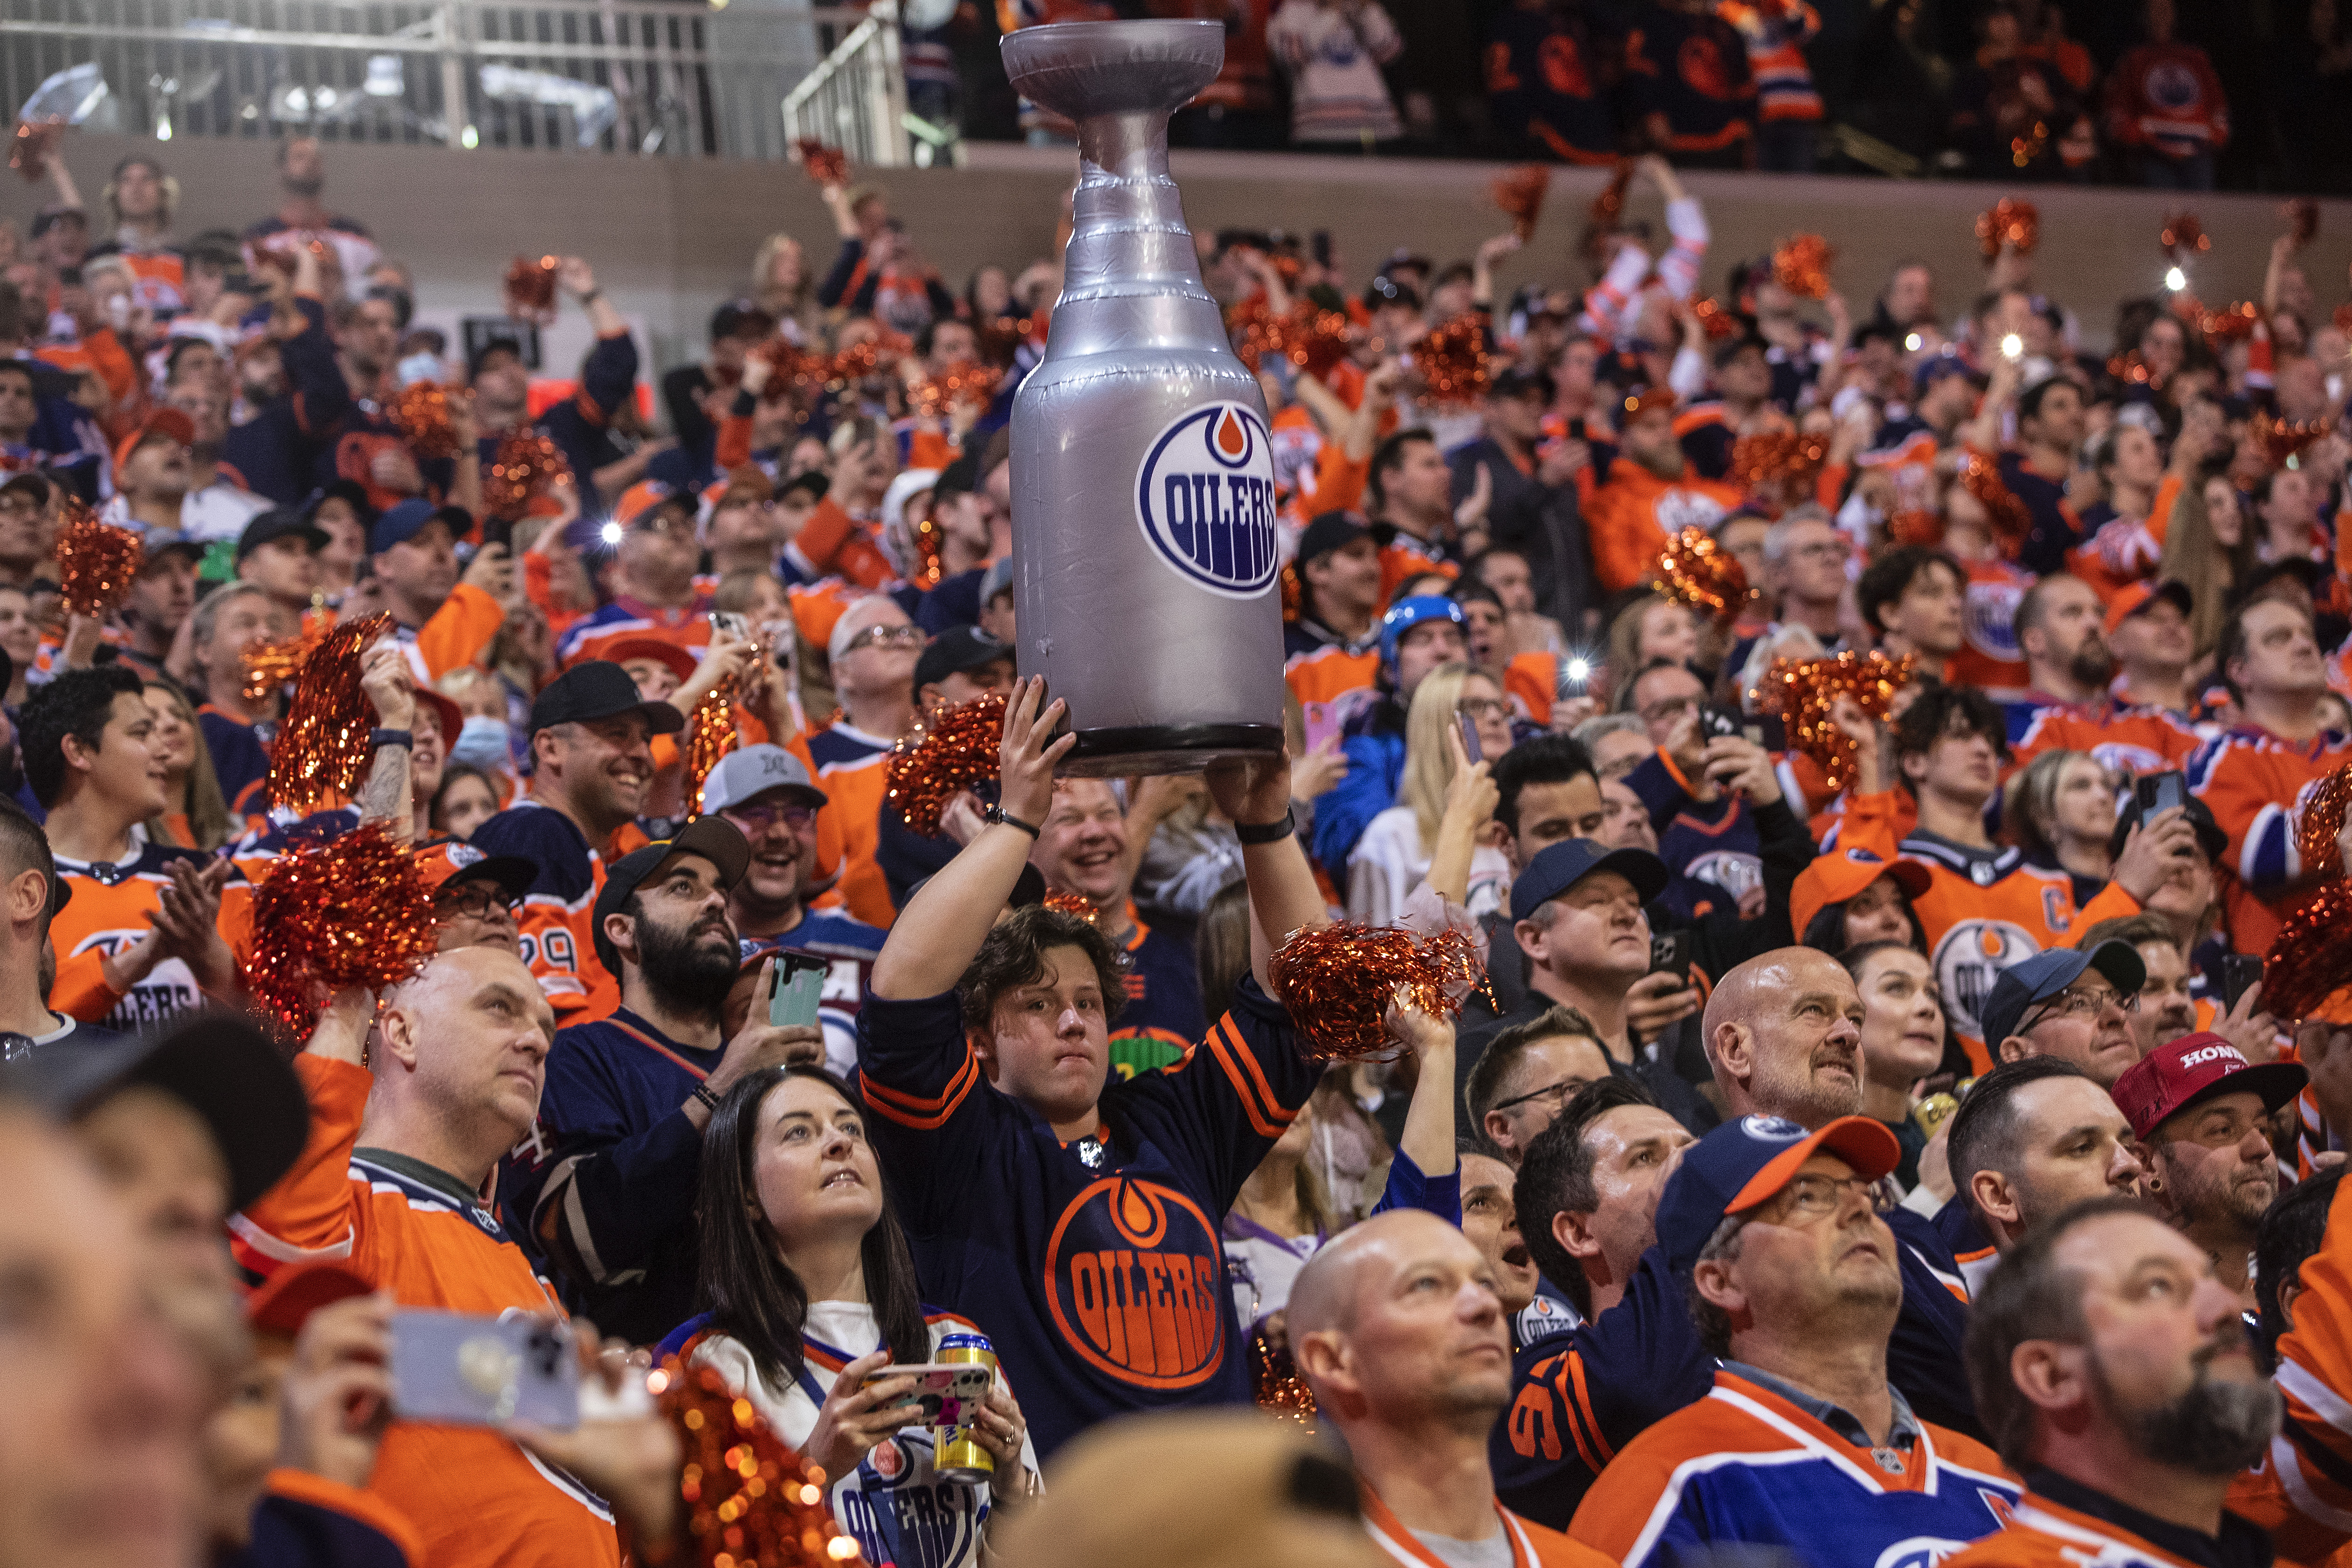 Higher Edmonton Oilers playoff tickets a downside of passionate supply-and-demand: Economist